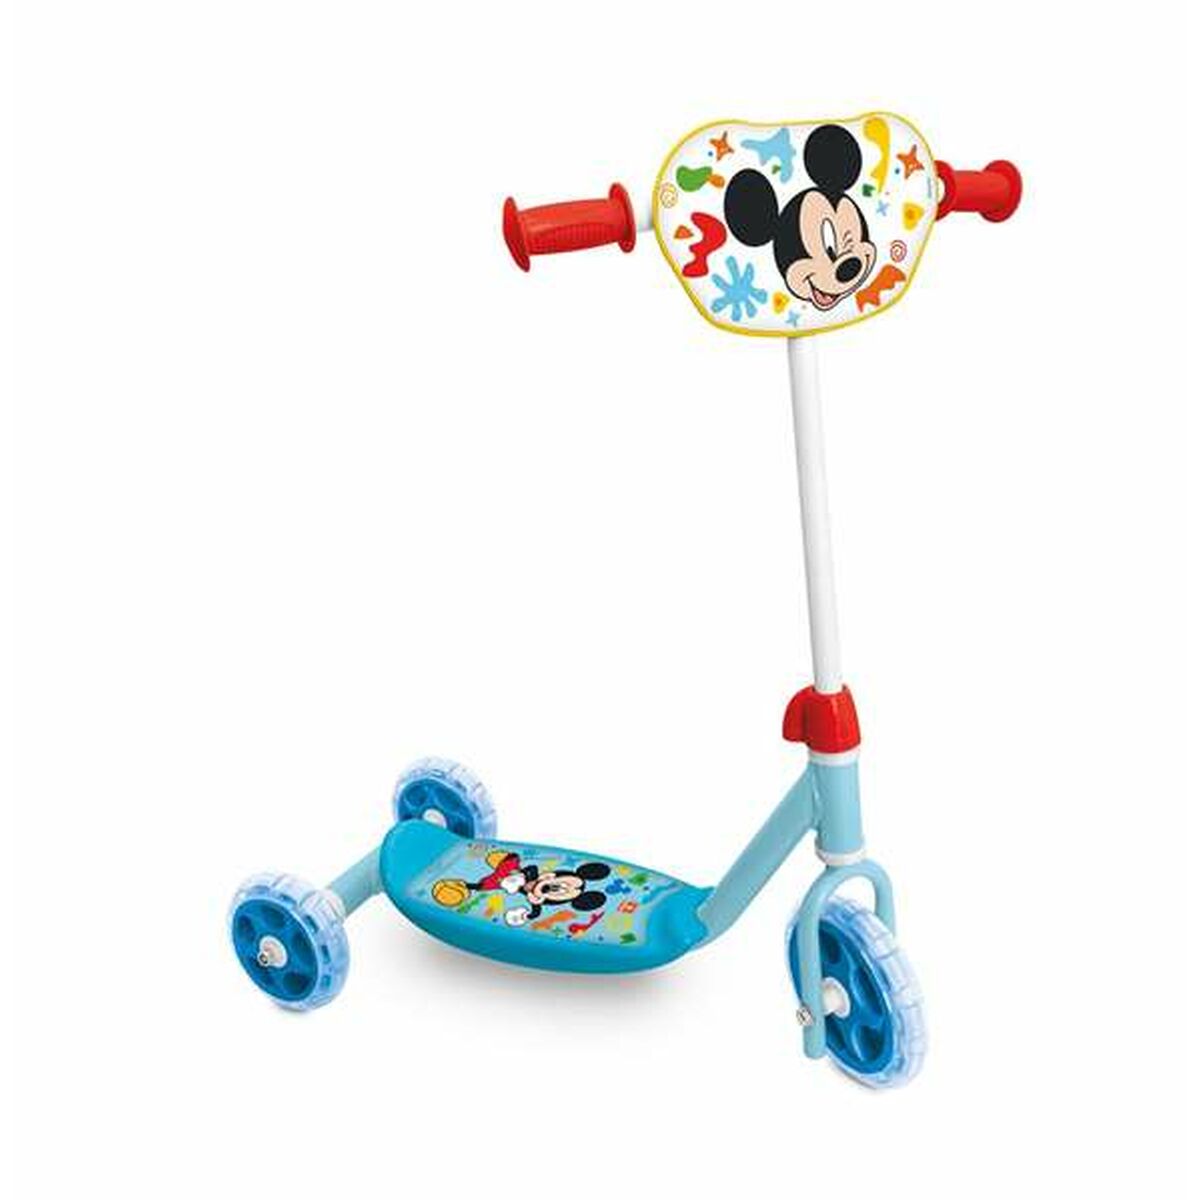 Trottinette Mickey Mouse    60 x 46 x 13,5 cm 3 roues